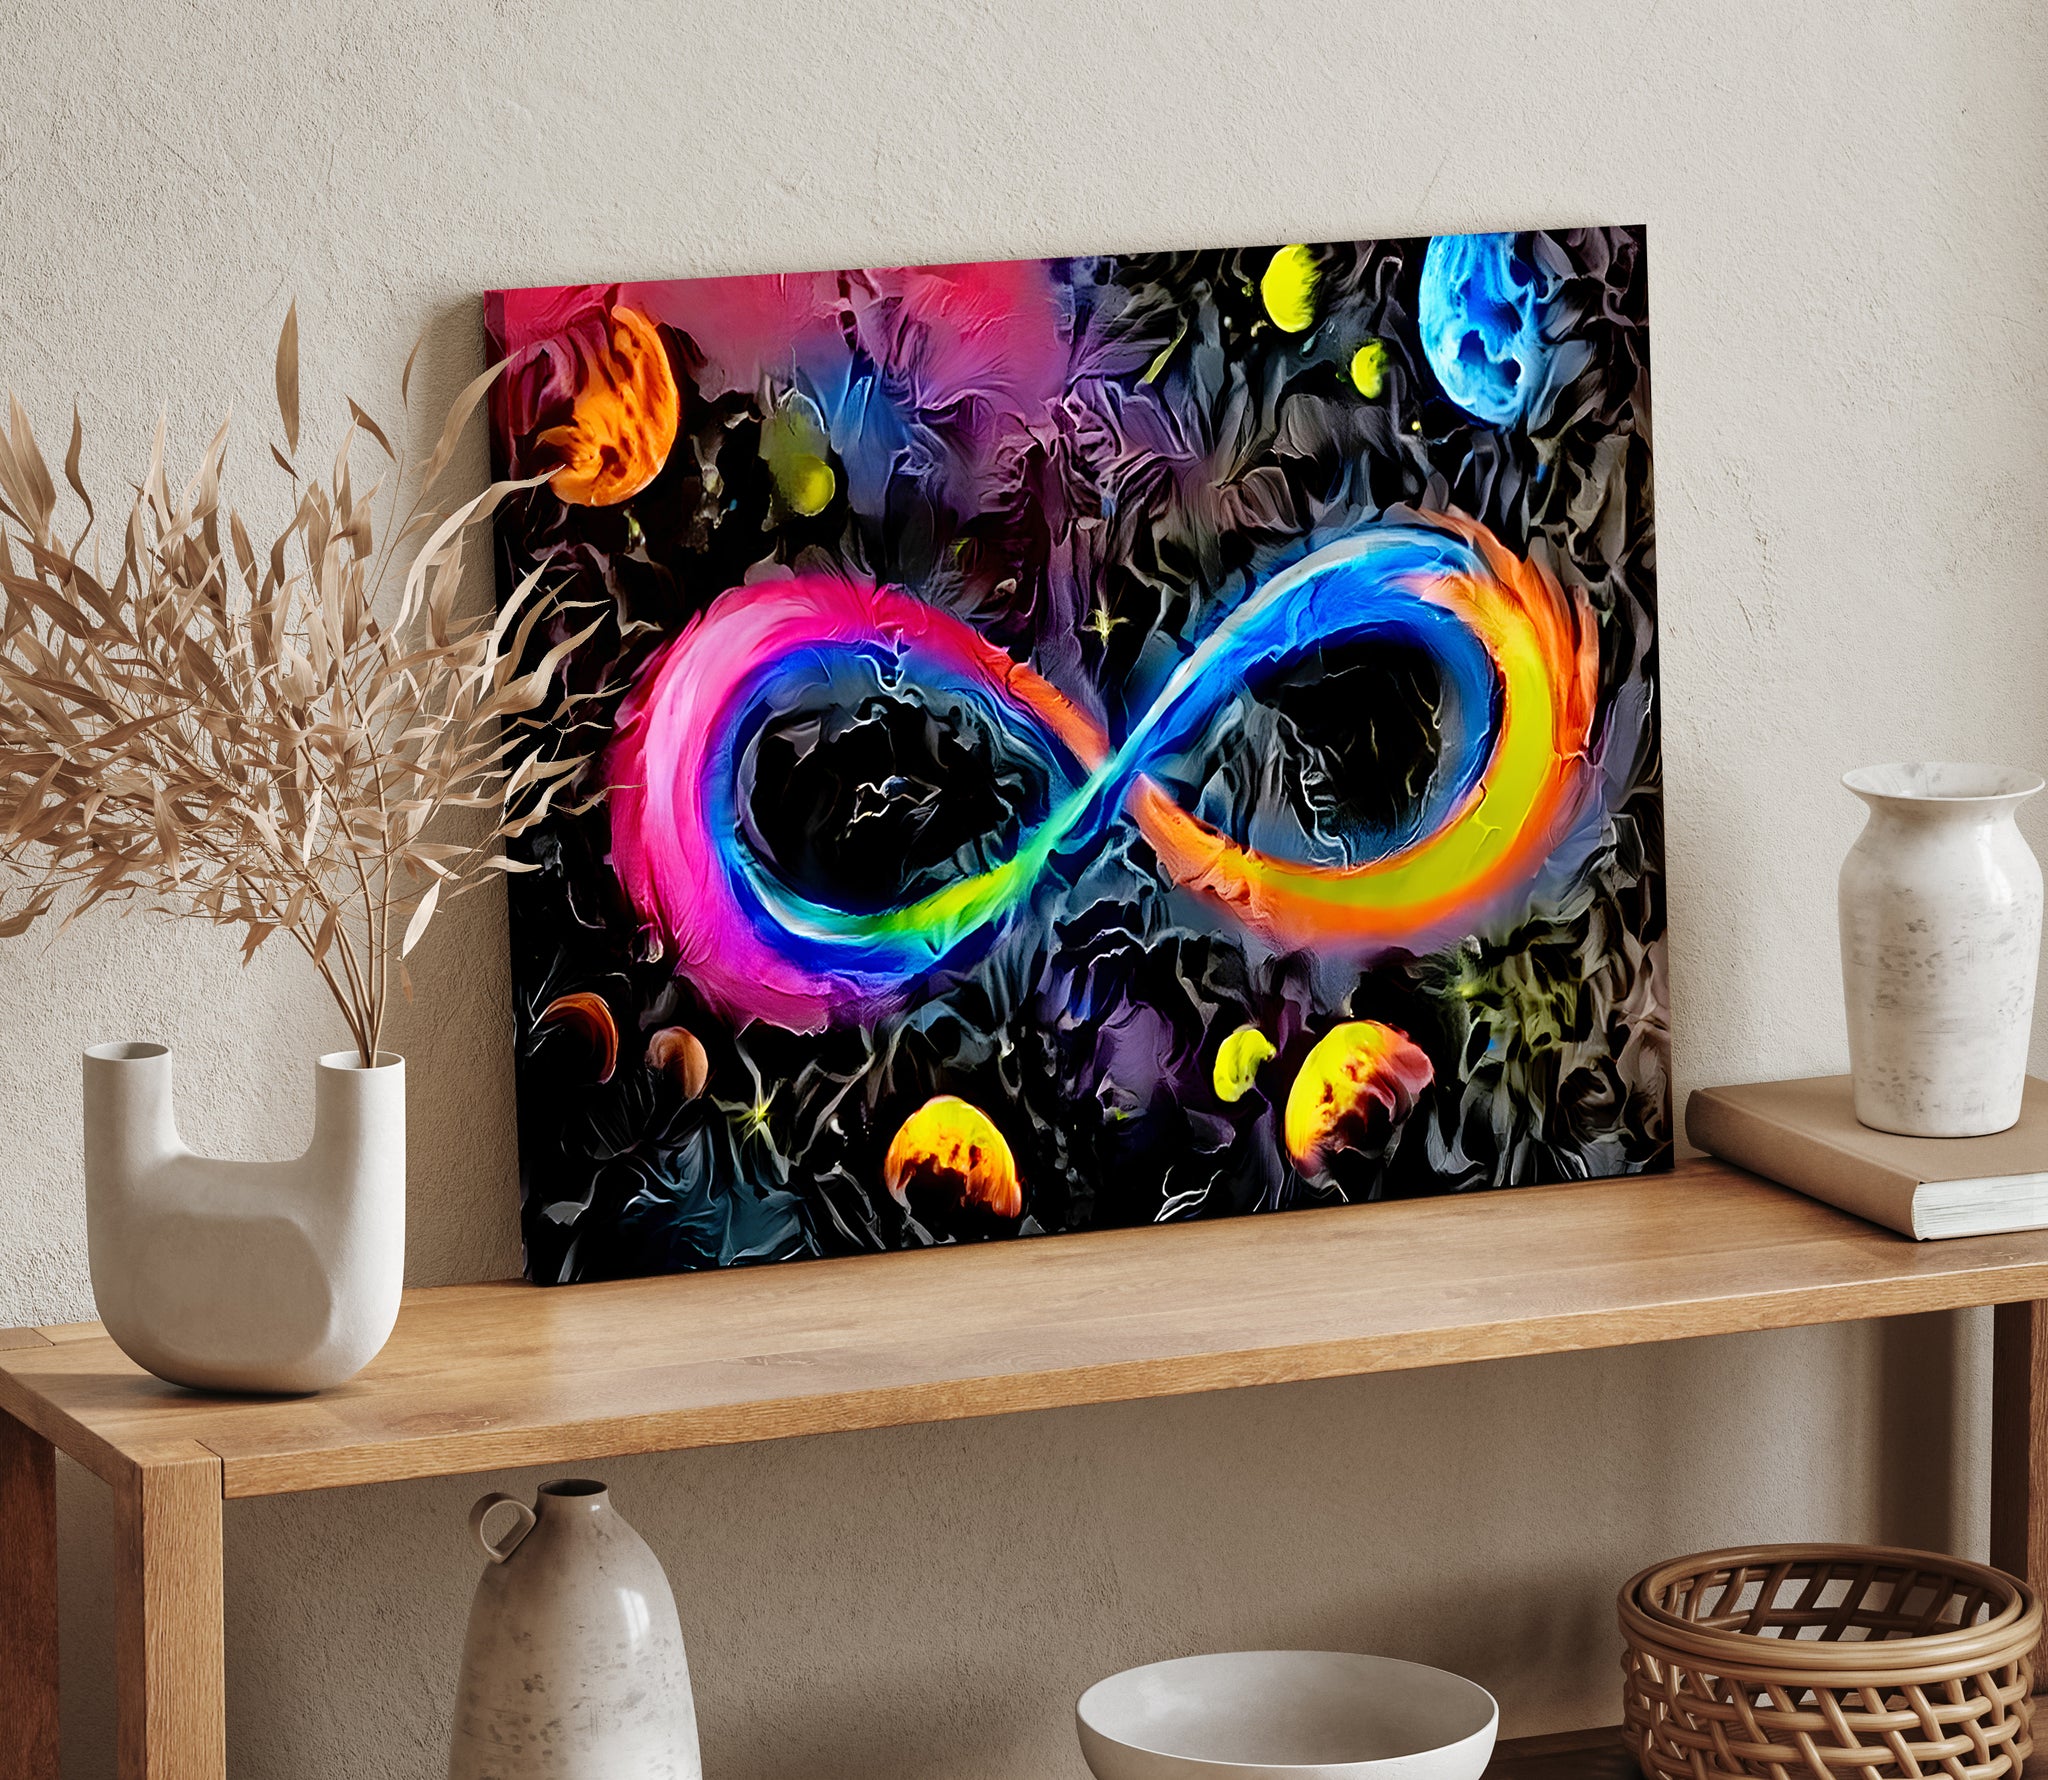 Infinite Galaxy Textured Infinity Wall Art, Wall Decor,  Artistic Painting,  Stretched Canvas, Poster, Digital Artwork, Rainbow,